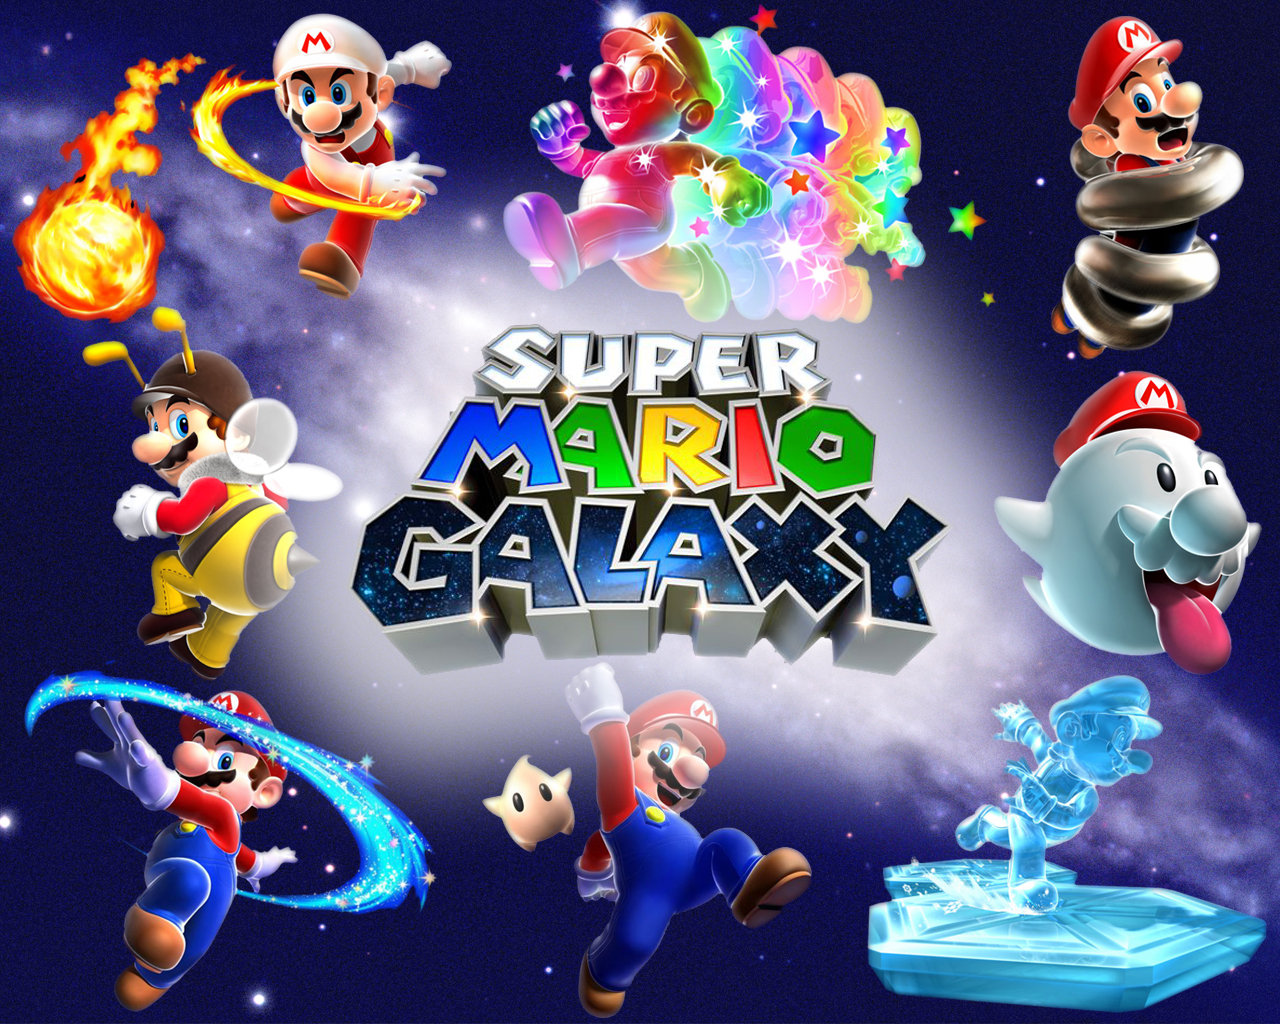 Super Mario Galaxy Backgrounds on Wallpapers Vista. 